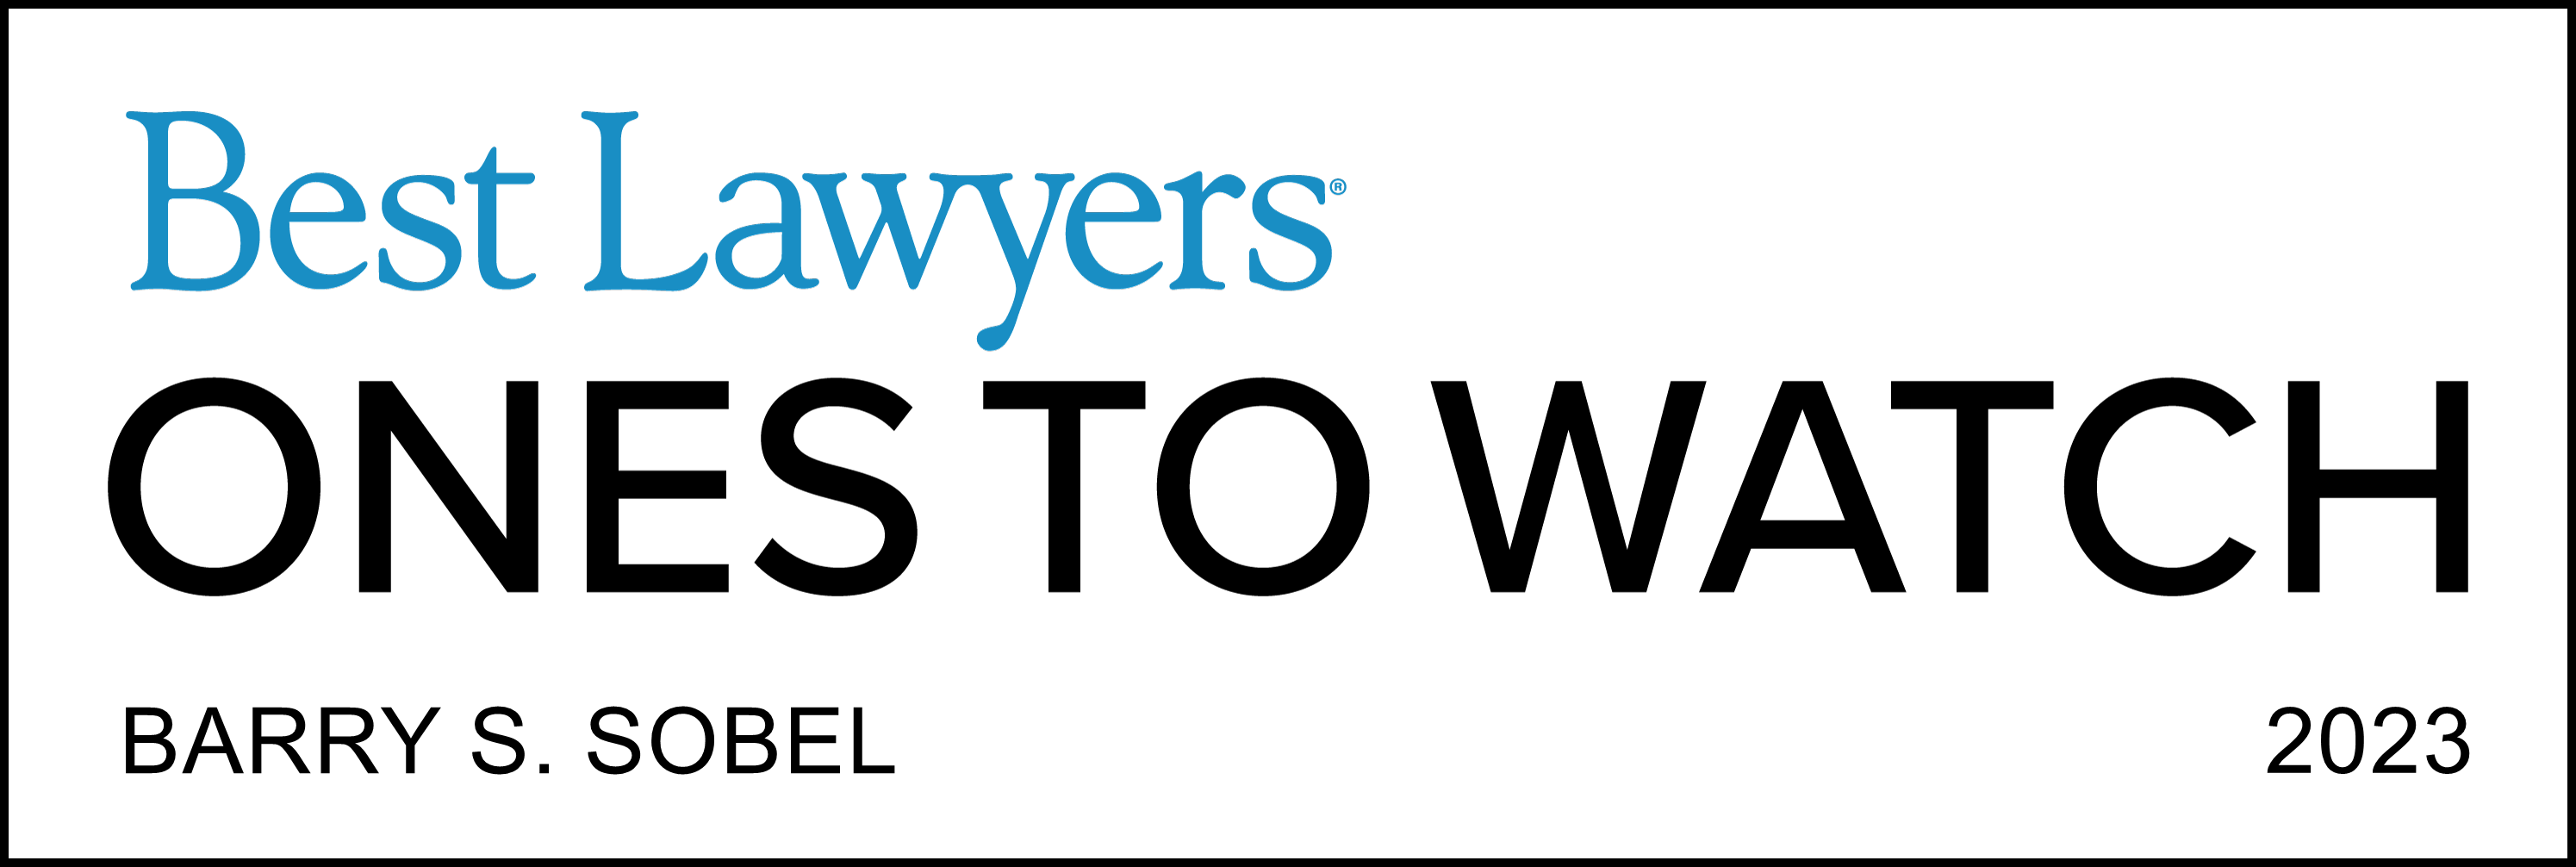 Barry S. Sobel Recognized by Best Lawyers Ones To Watch 